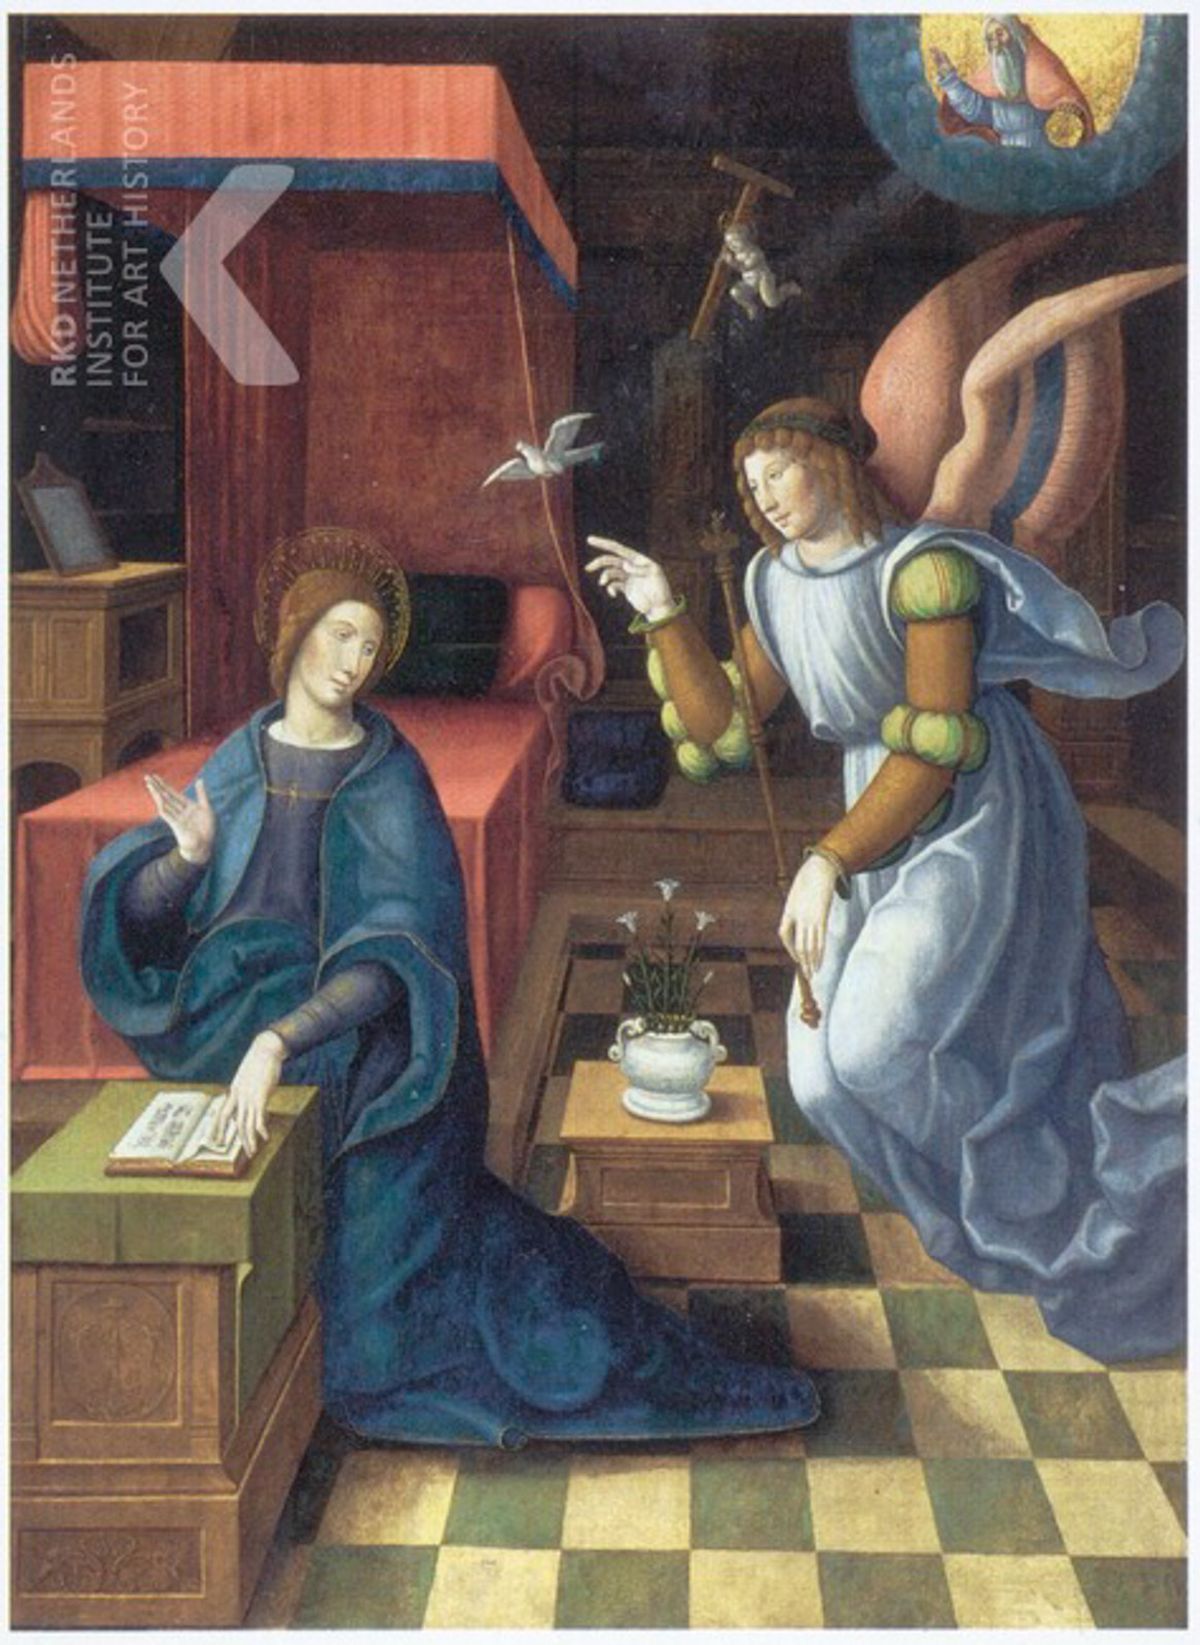 Frédéric Elsig’s connoisseurship established that Nicolas Cordonnier was the painter of The Annunciation (around 1520) and other works previously attributed to the artist known only as the Master of the Legend of the Holy House © Rijksbureau voor kunsthistorische documentatie